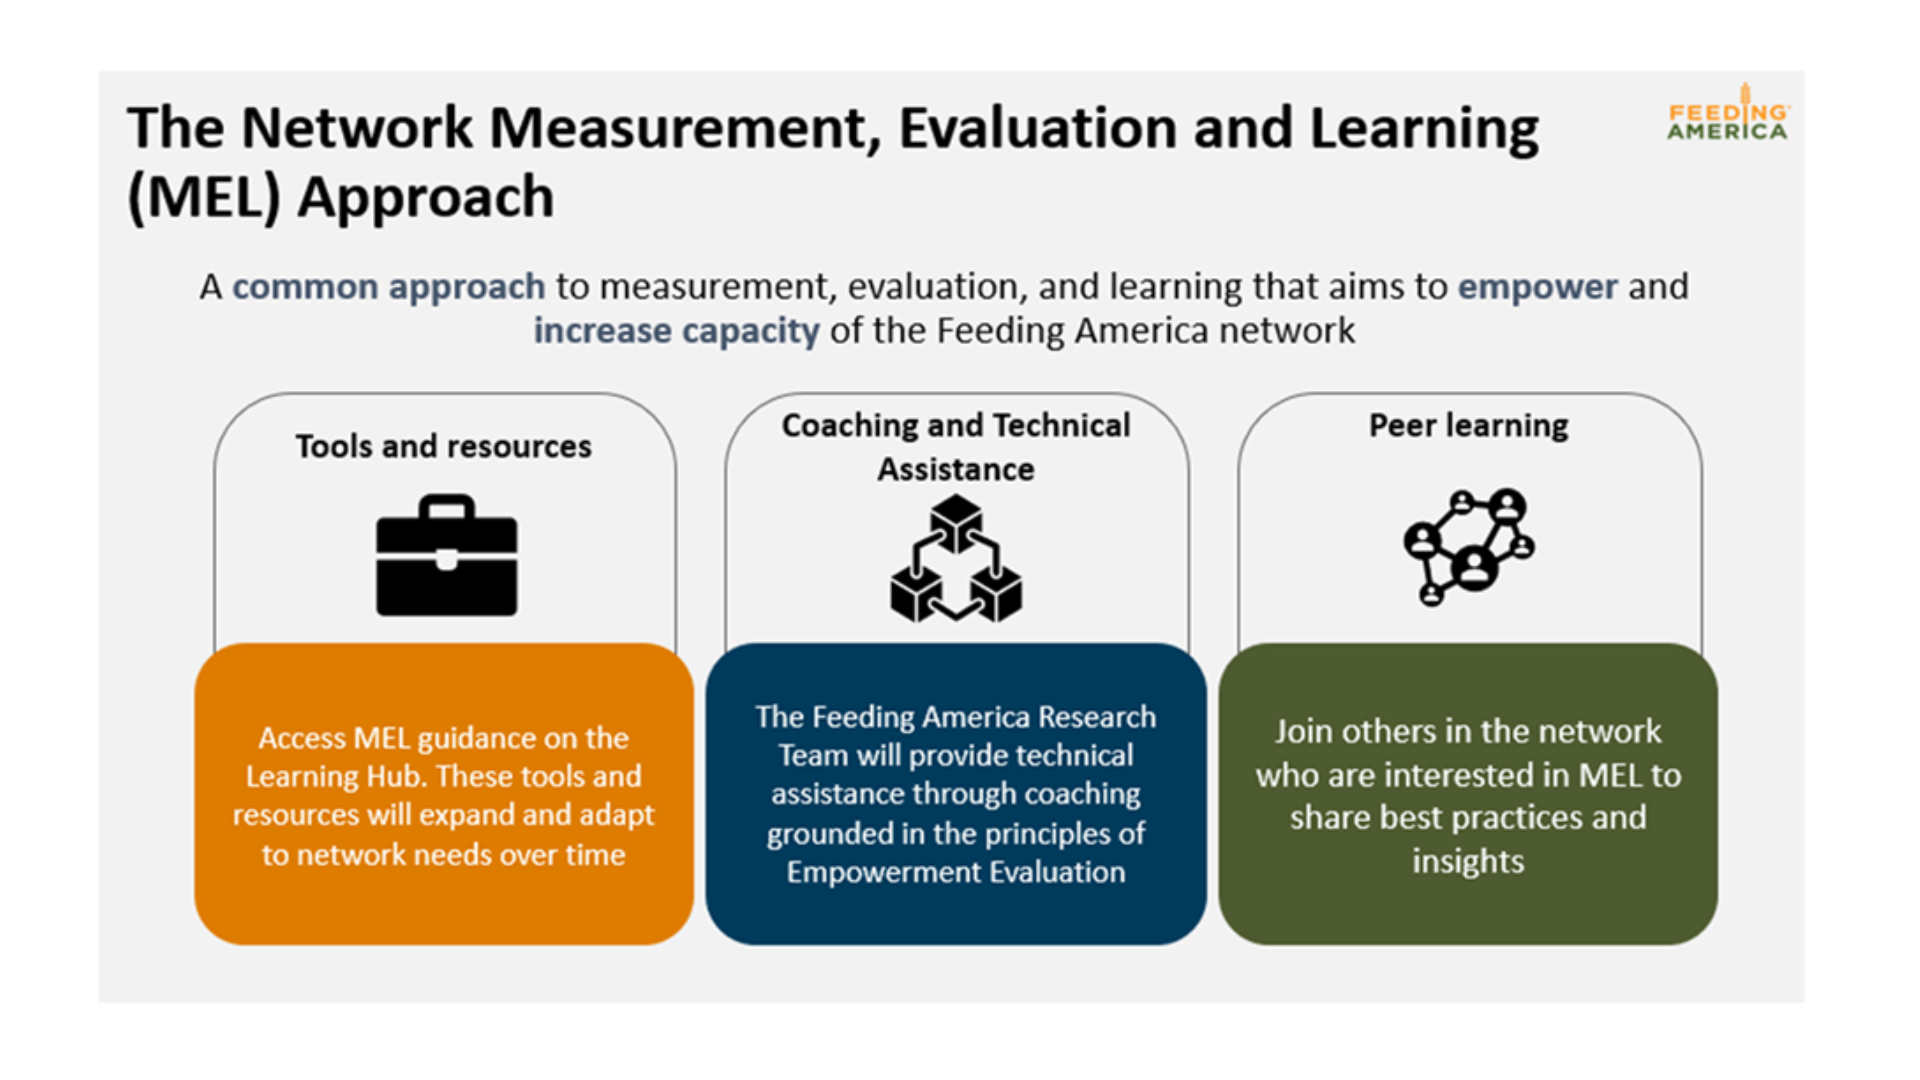 What is the Network Measurement, Evaluation, and Learning Approach? 